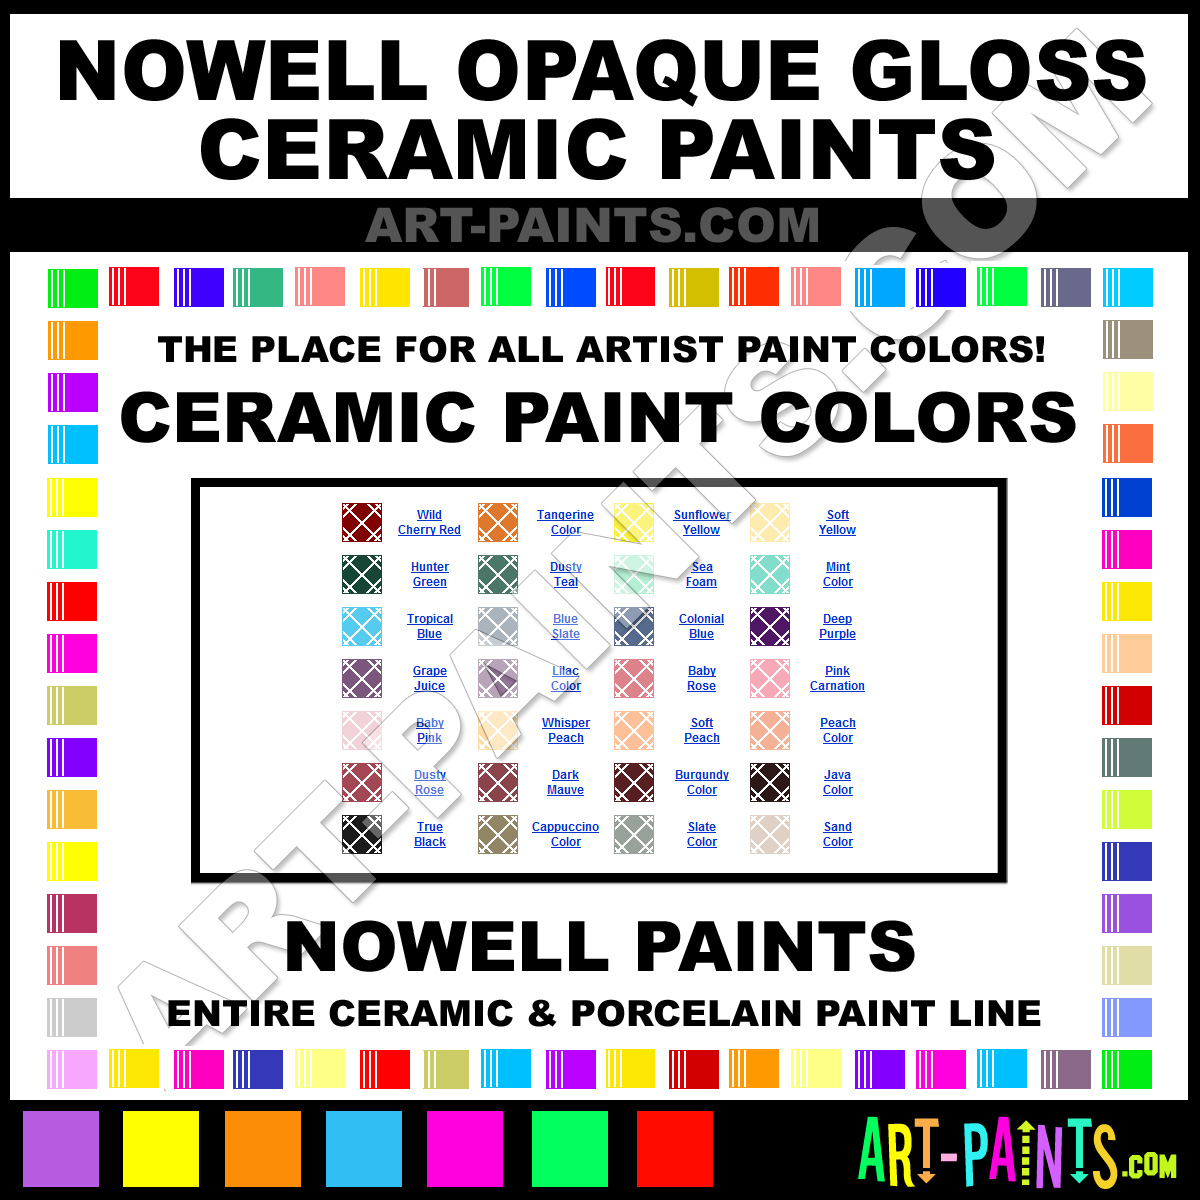 Dusty Teal Opaque Gloss Ceramic Paints - GL 117 - Dusty Teal Paint